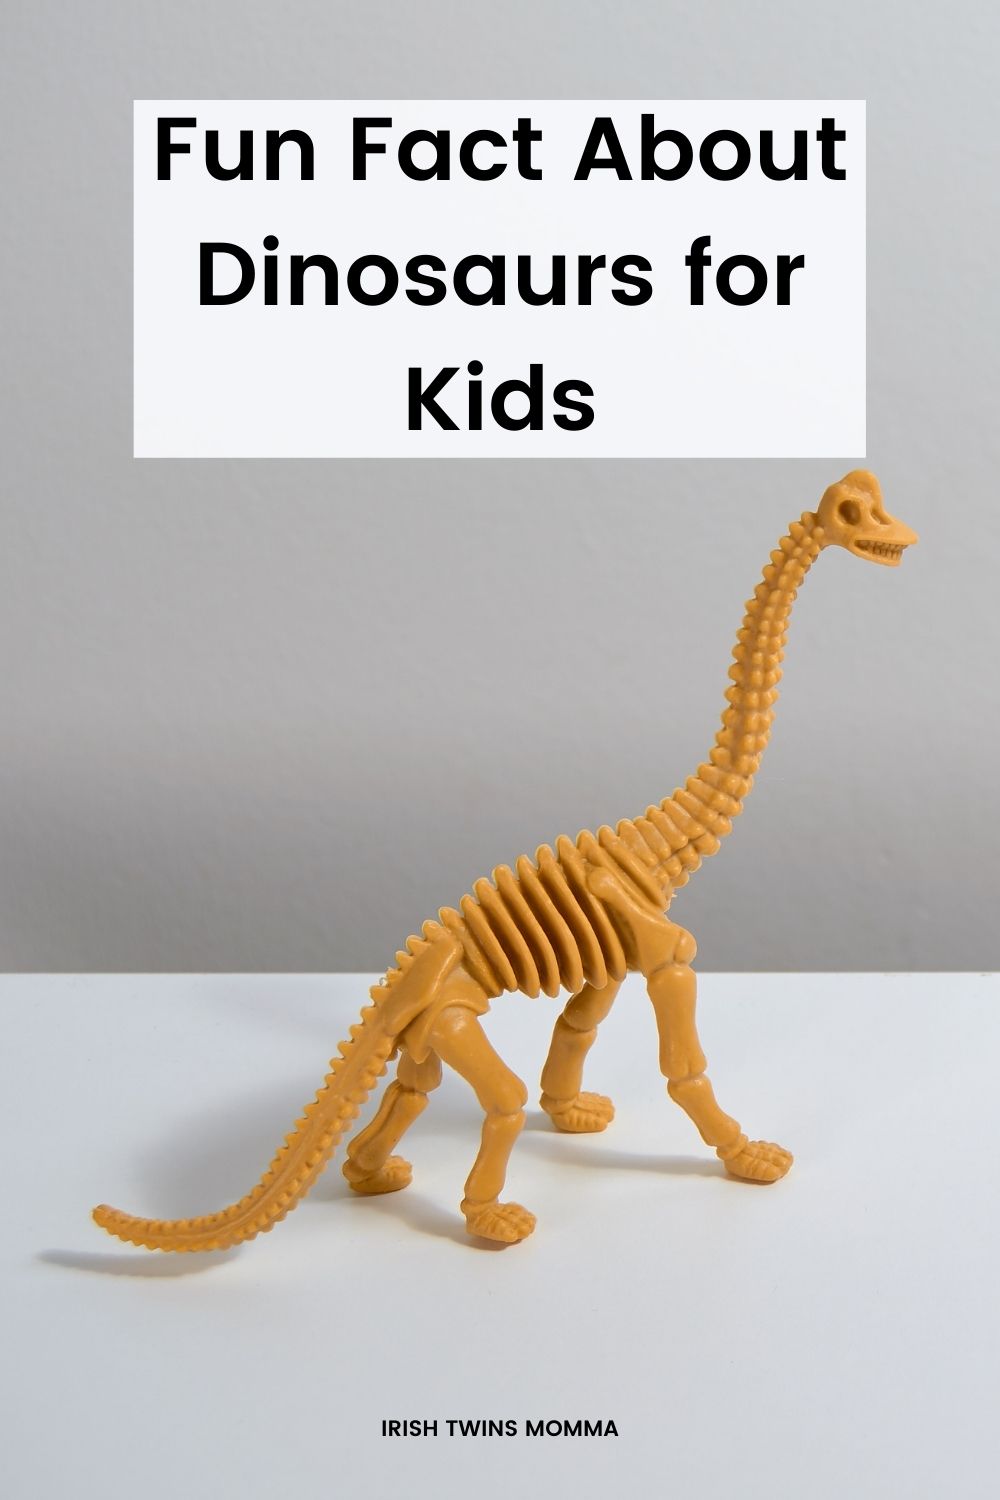 Fun Fact About Dinosaurs for Kids